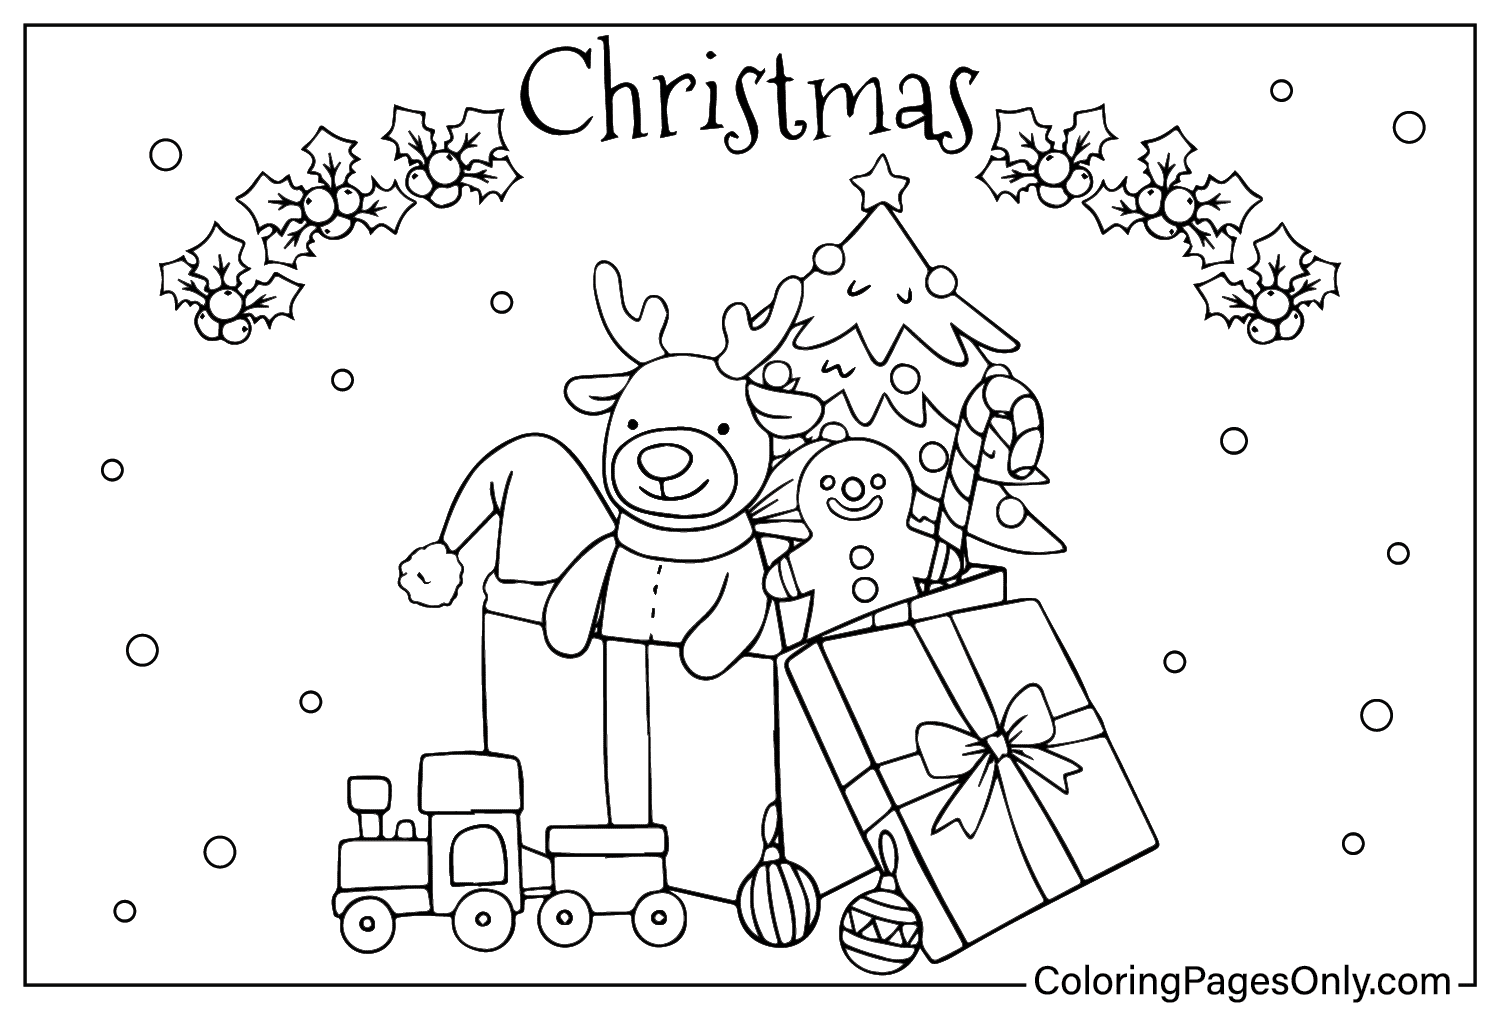 Christmas Coloring Page PDF - Free Printable Coloring Pages